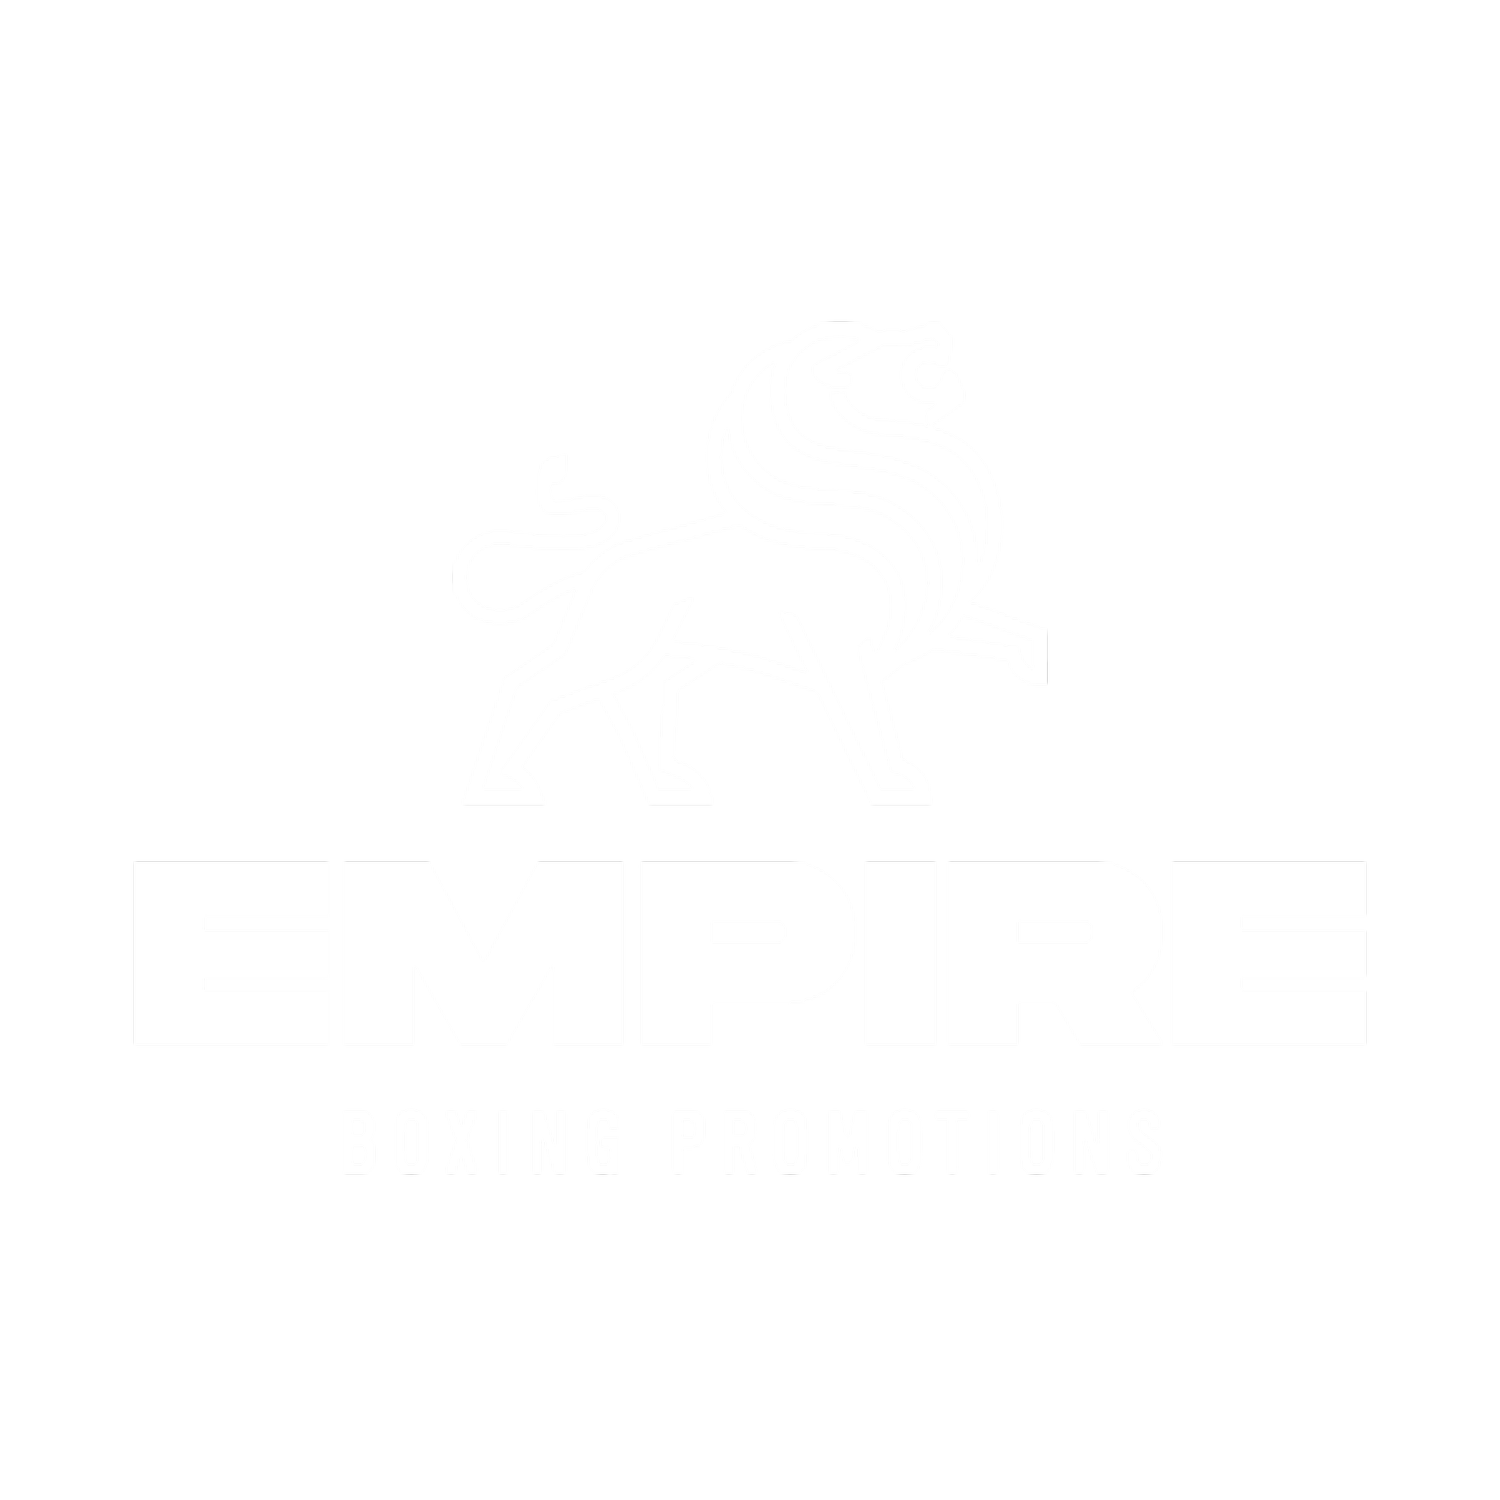 EMPIRE BOXING PROMOTIONS